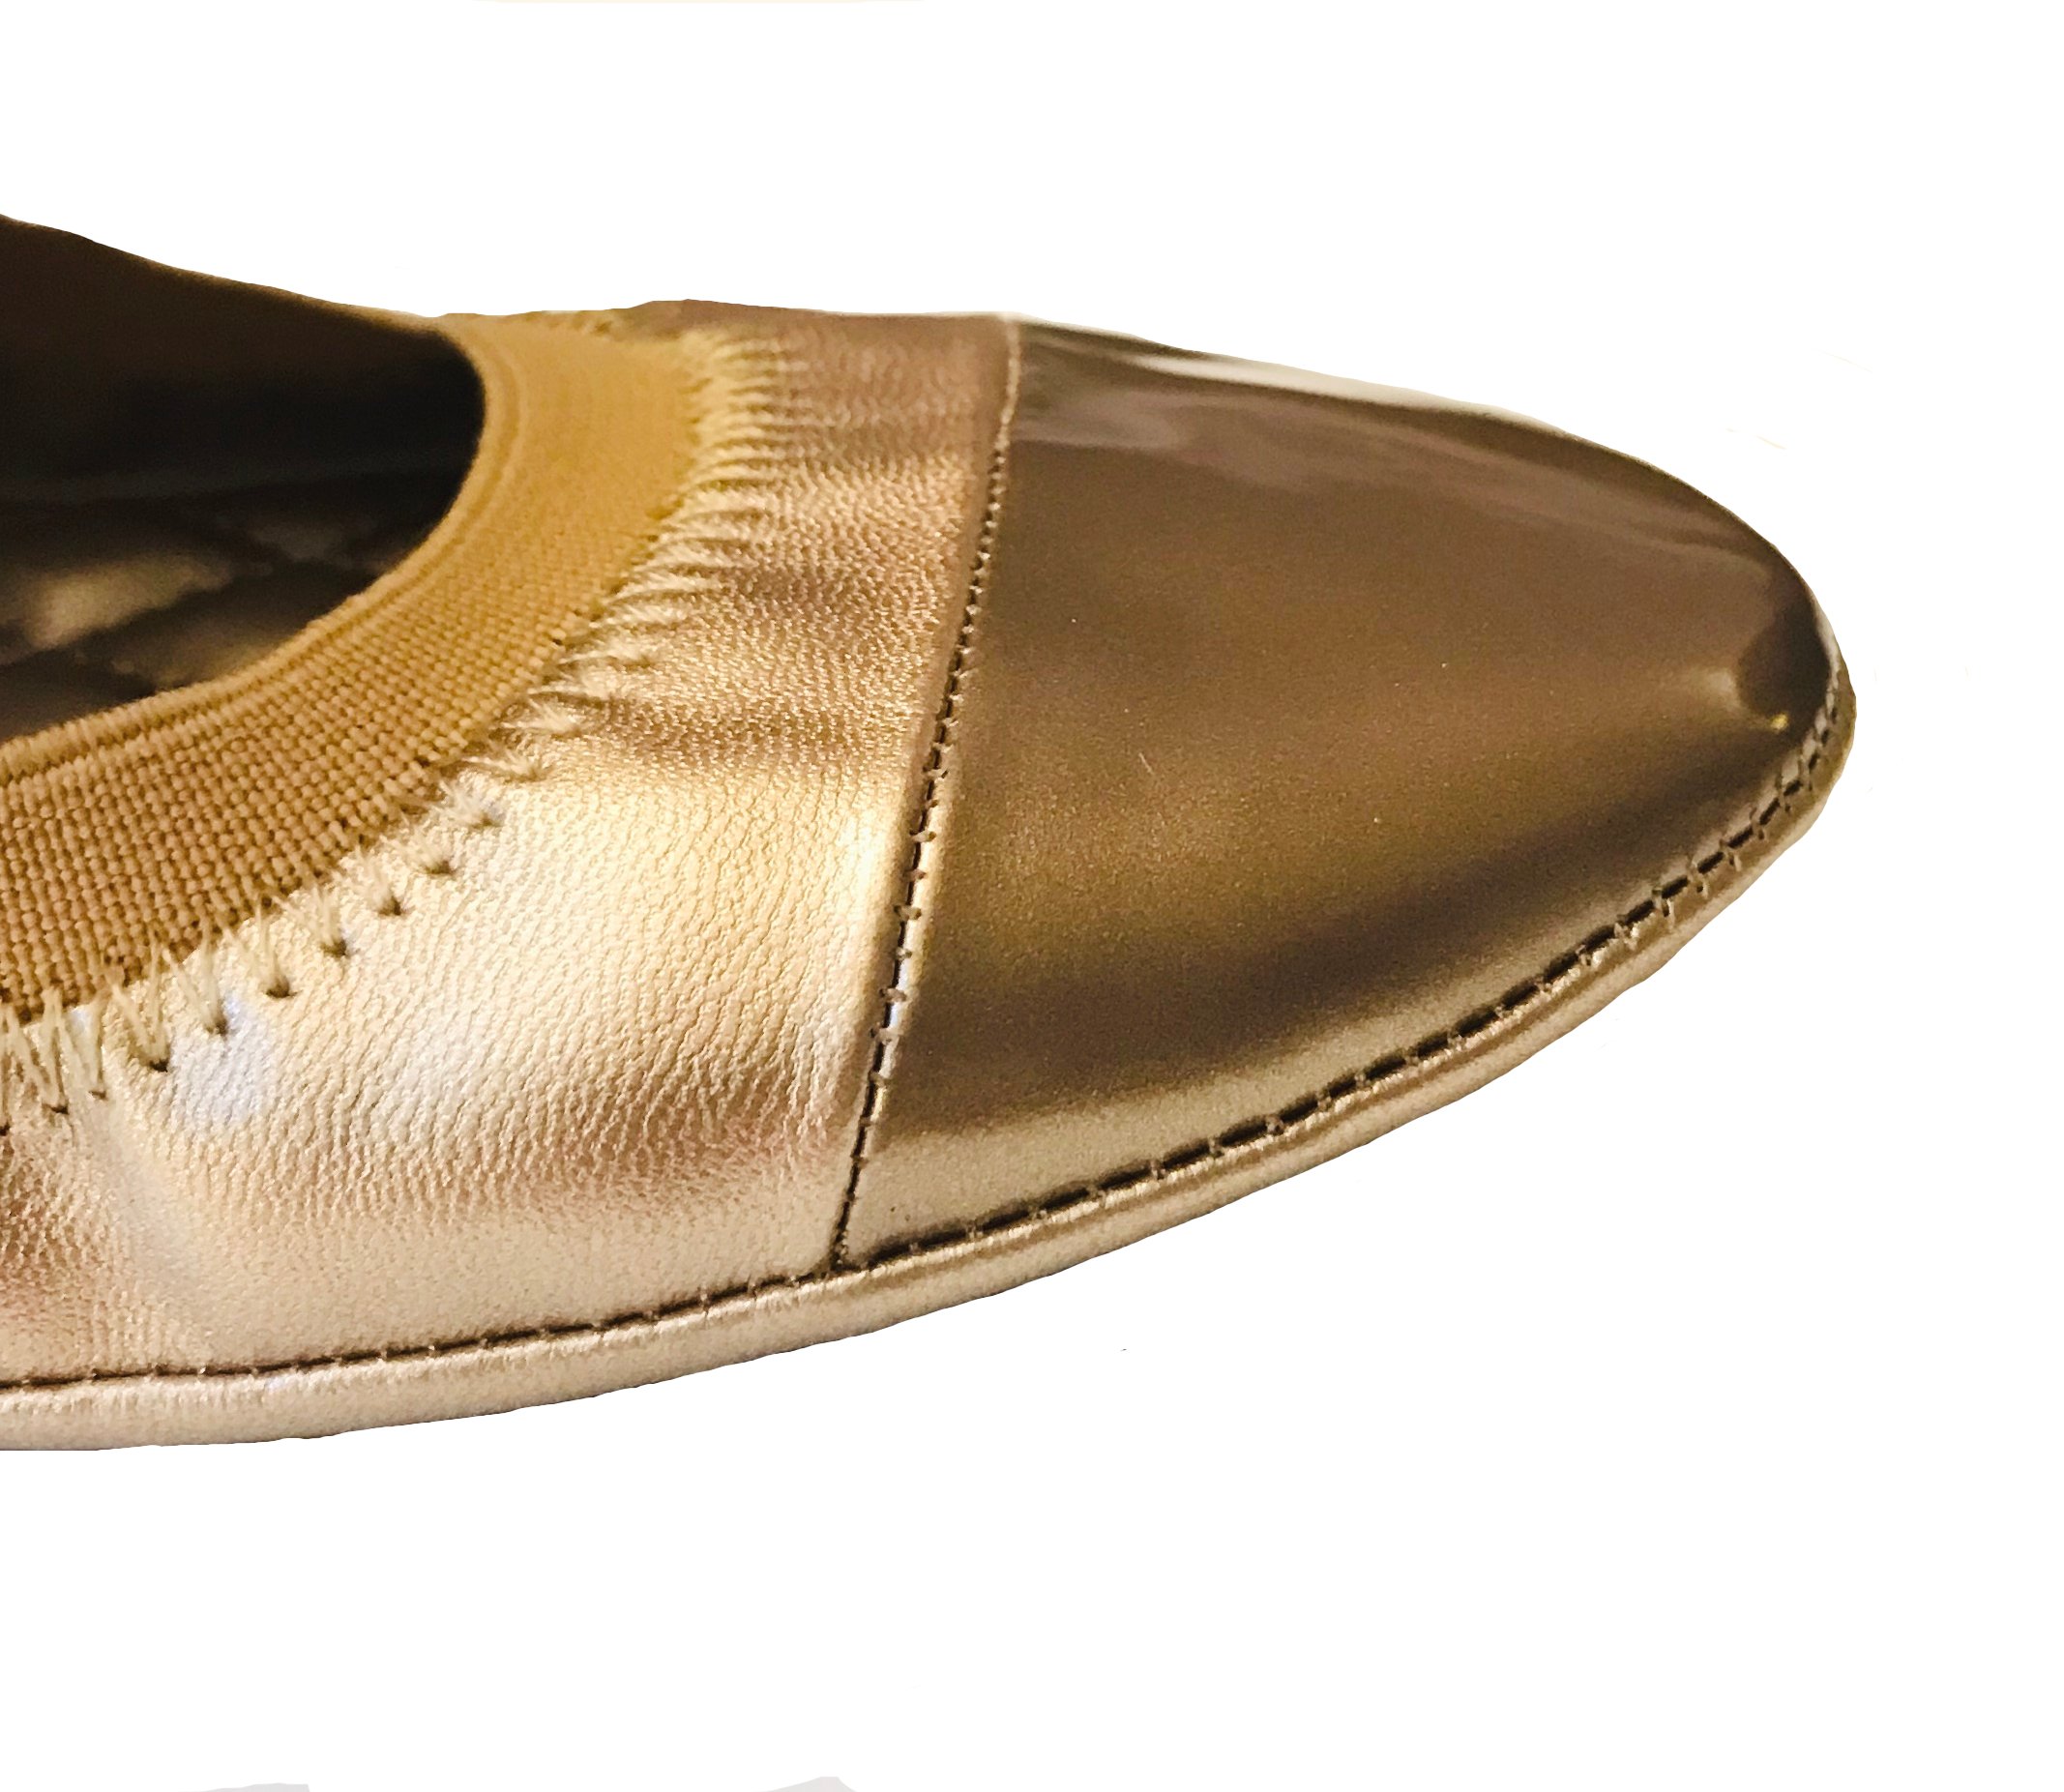 Comfort Two Tone Portable Folding Ballet Flats with carry pouch - Champagne 9 - image 3 of 4